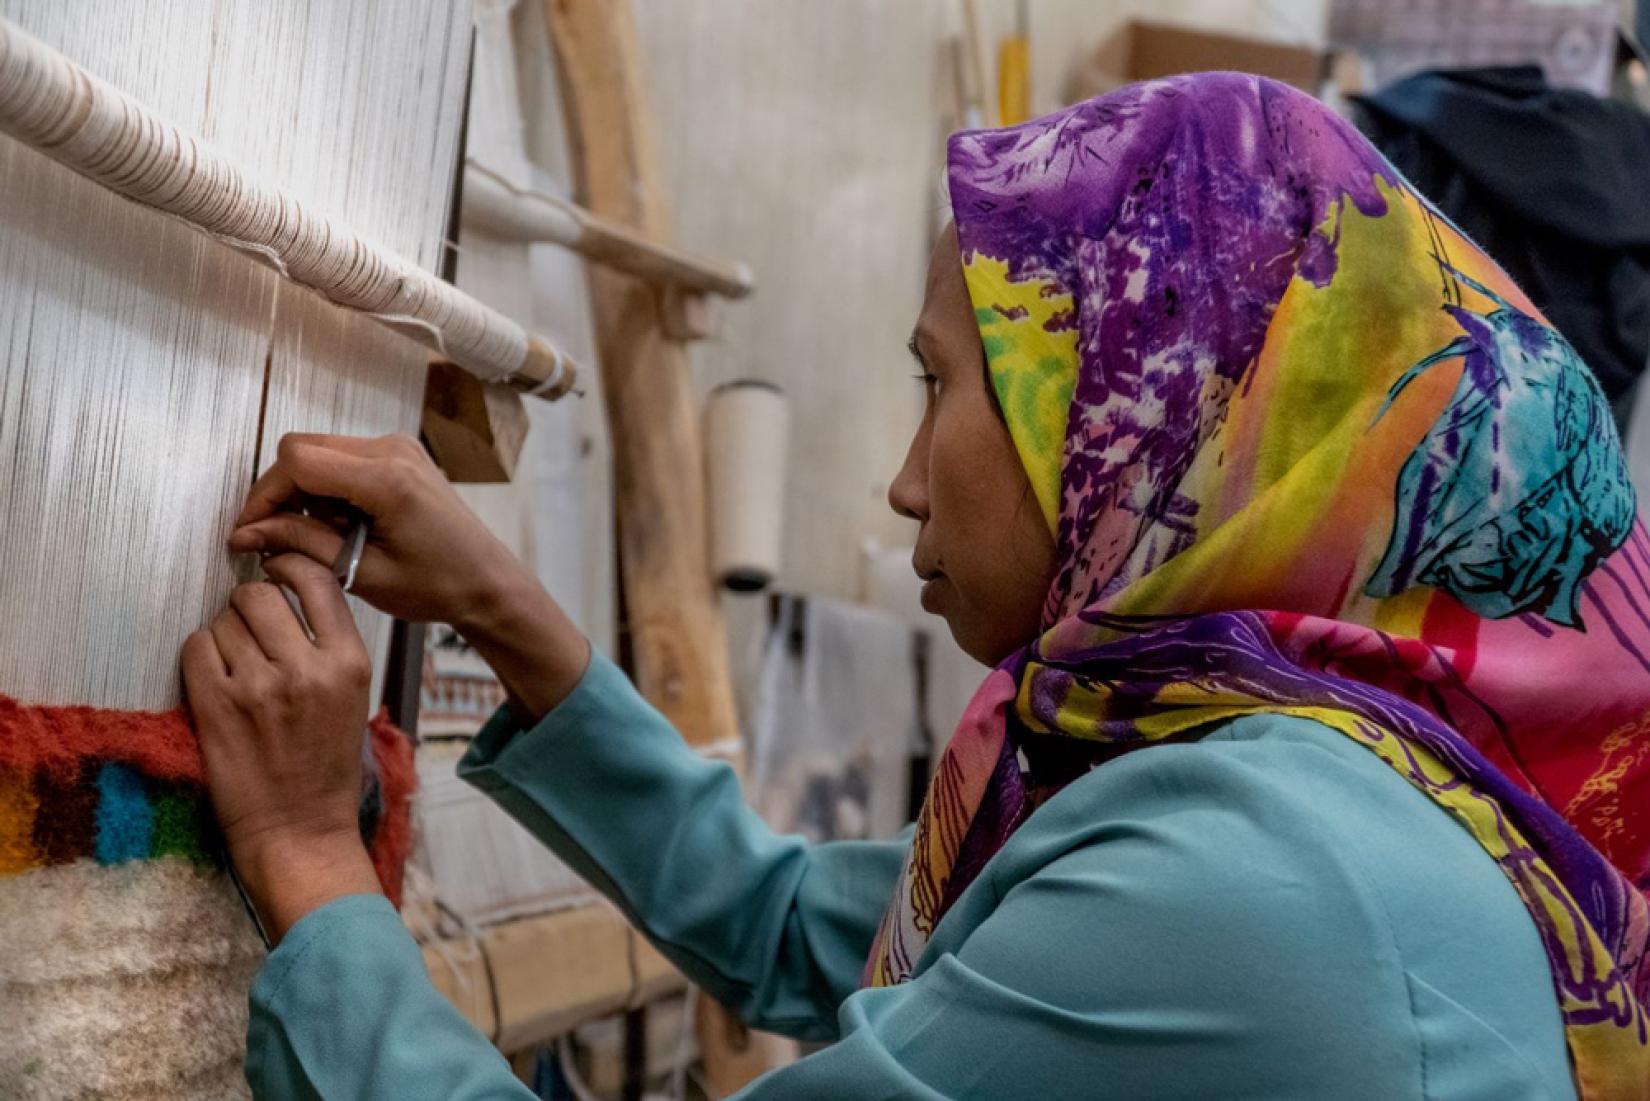 Maryam learned to weave two years ago and ties every knot with care and affection. © UNHCR/Mohammad Hossein Dehghanian